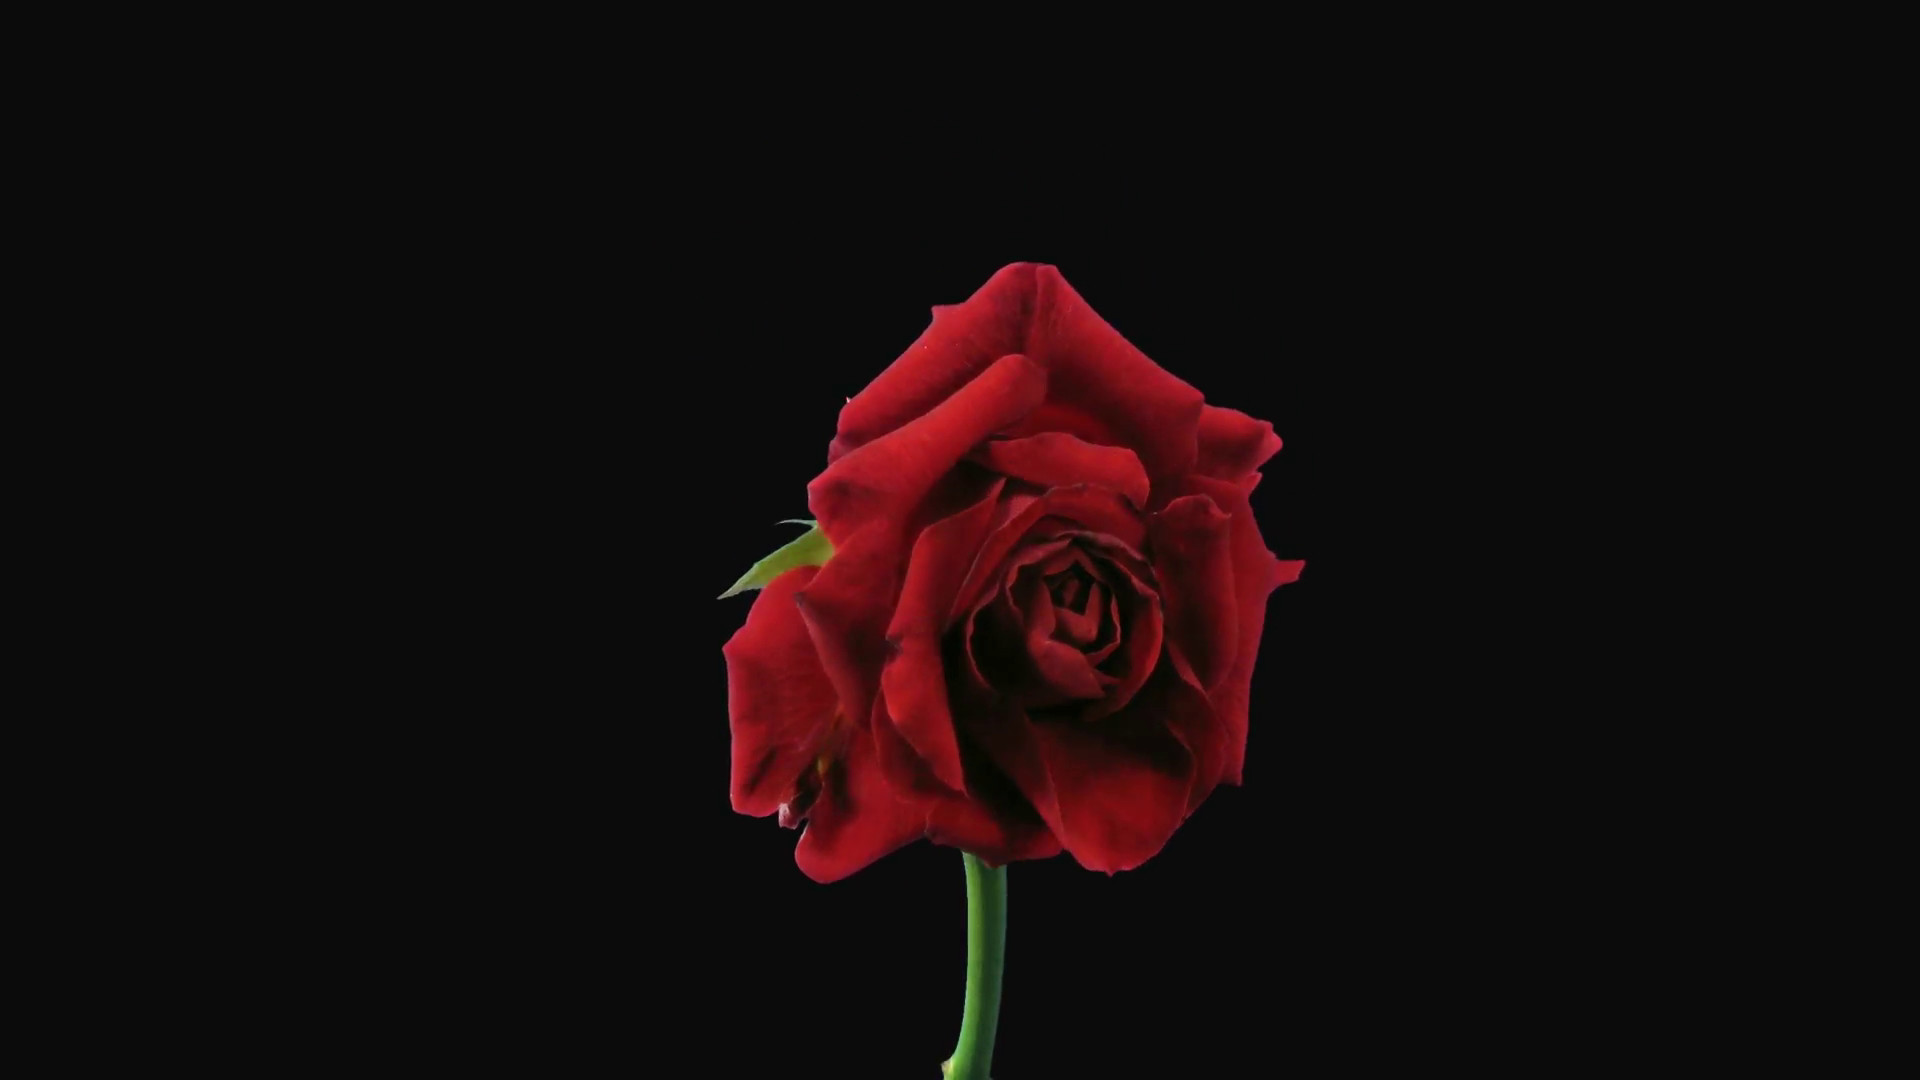 Red Rose IPhone Wallpaper (82+ images)